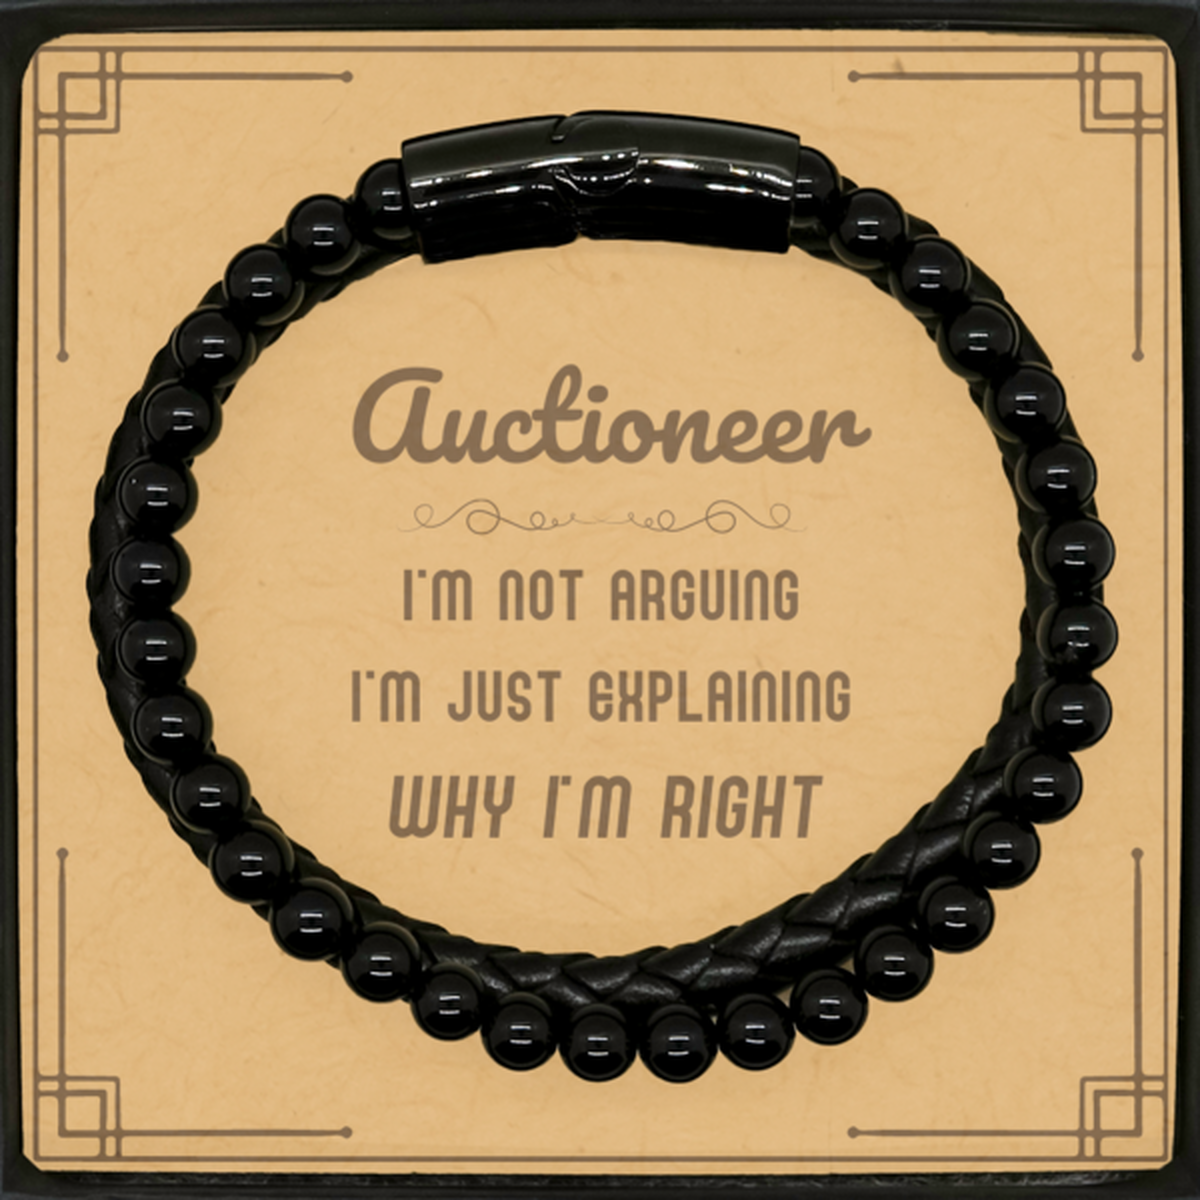 Auctioneer I'm not Arguing. I'm Just Explaining Why I'm RIGHT Stone Leather Bracelets, Funny Saying Quote Auctioneer Gifts For Auctioneer Message Card Graduation Birthday Christmas Gifts for Men Women Coworker